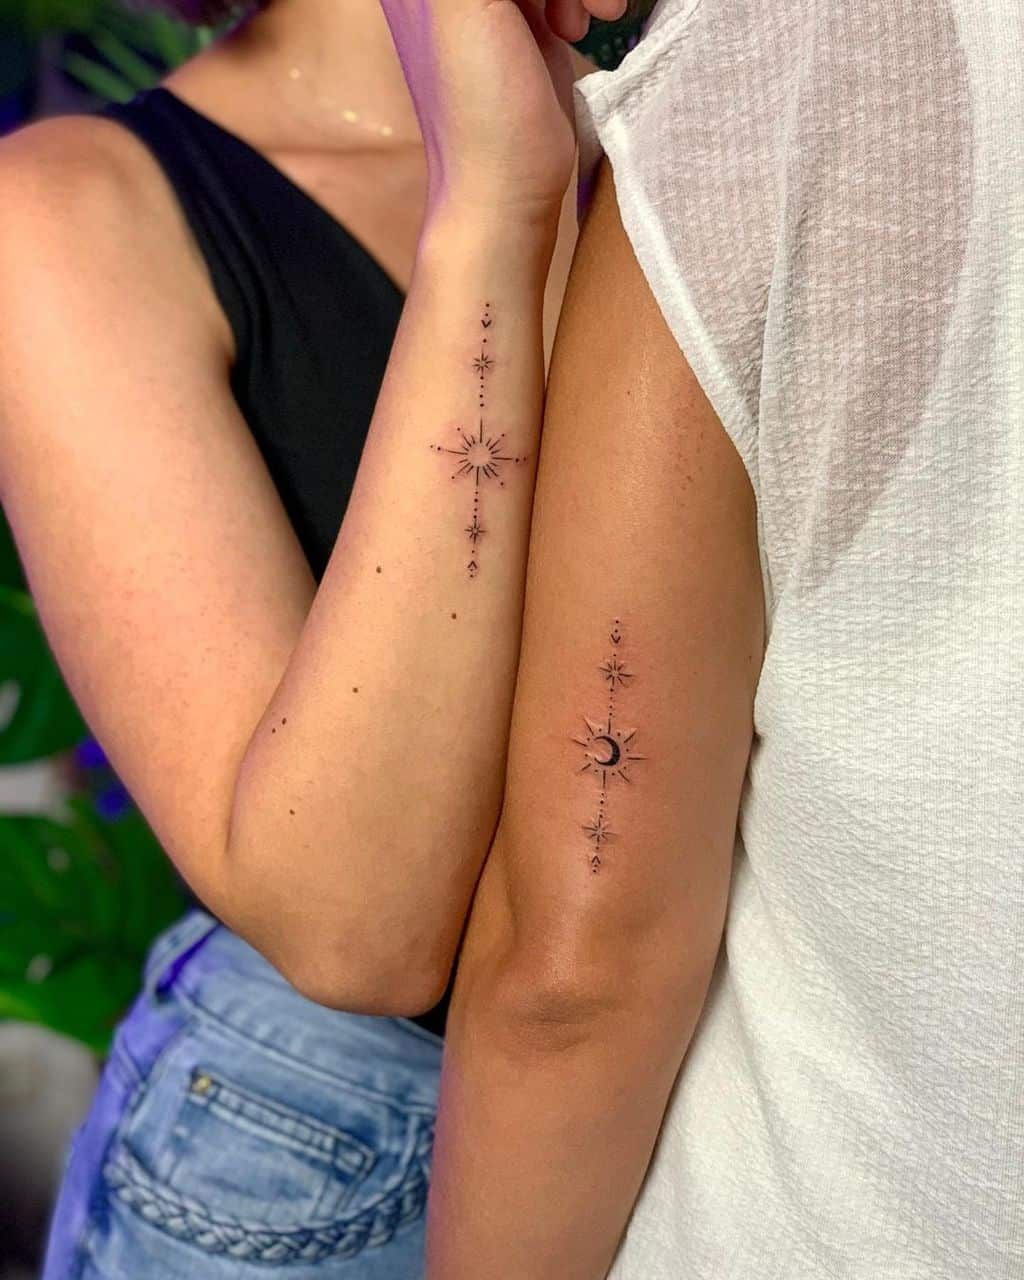 Share 99 about love symbol tattoos for couples super cool  indaotaonec